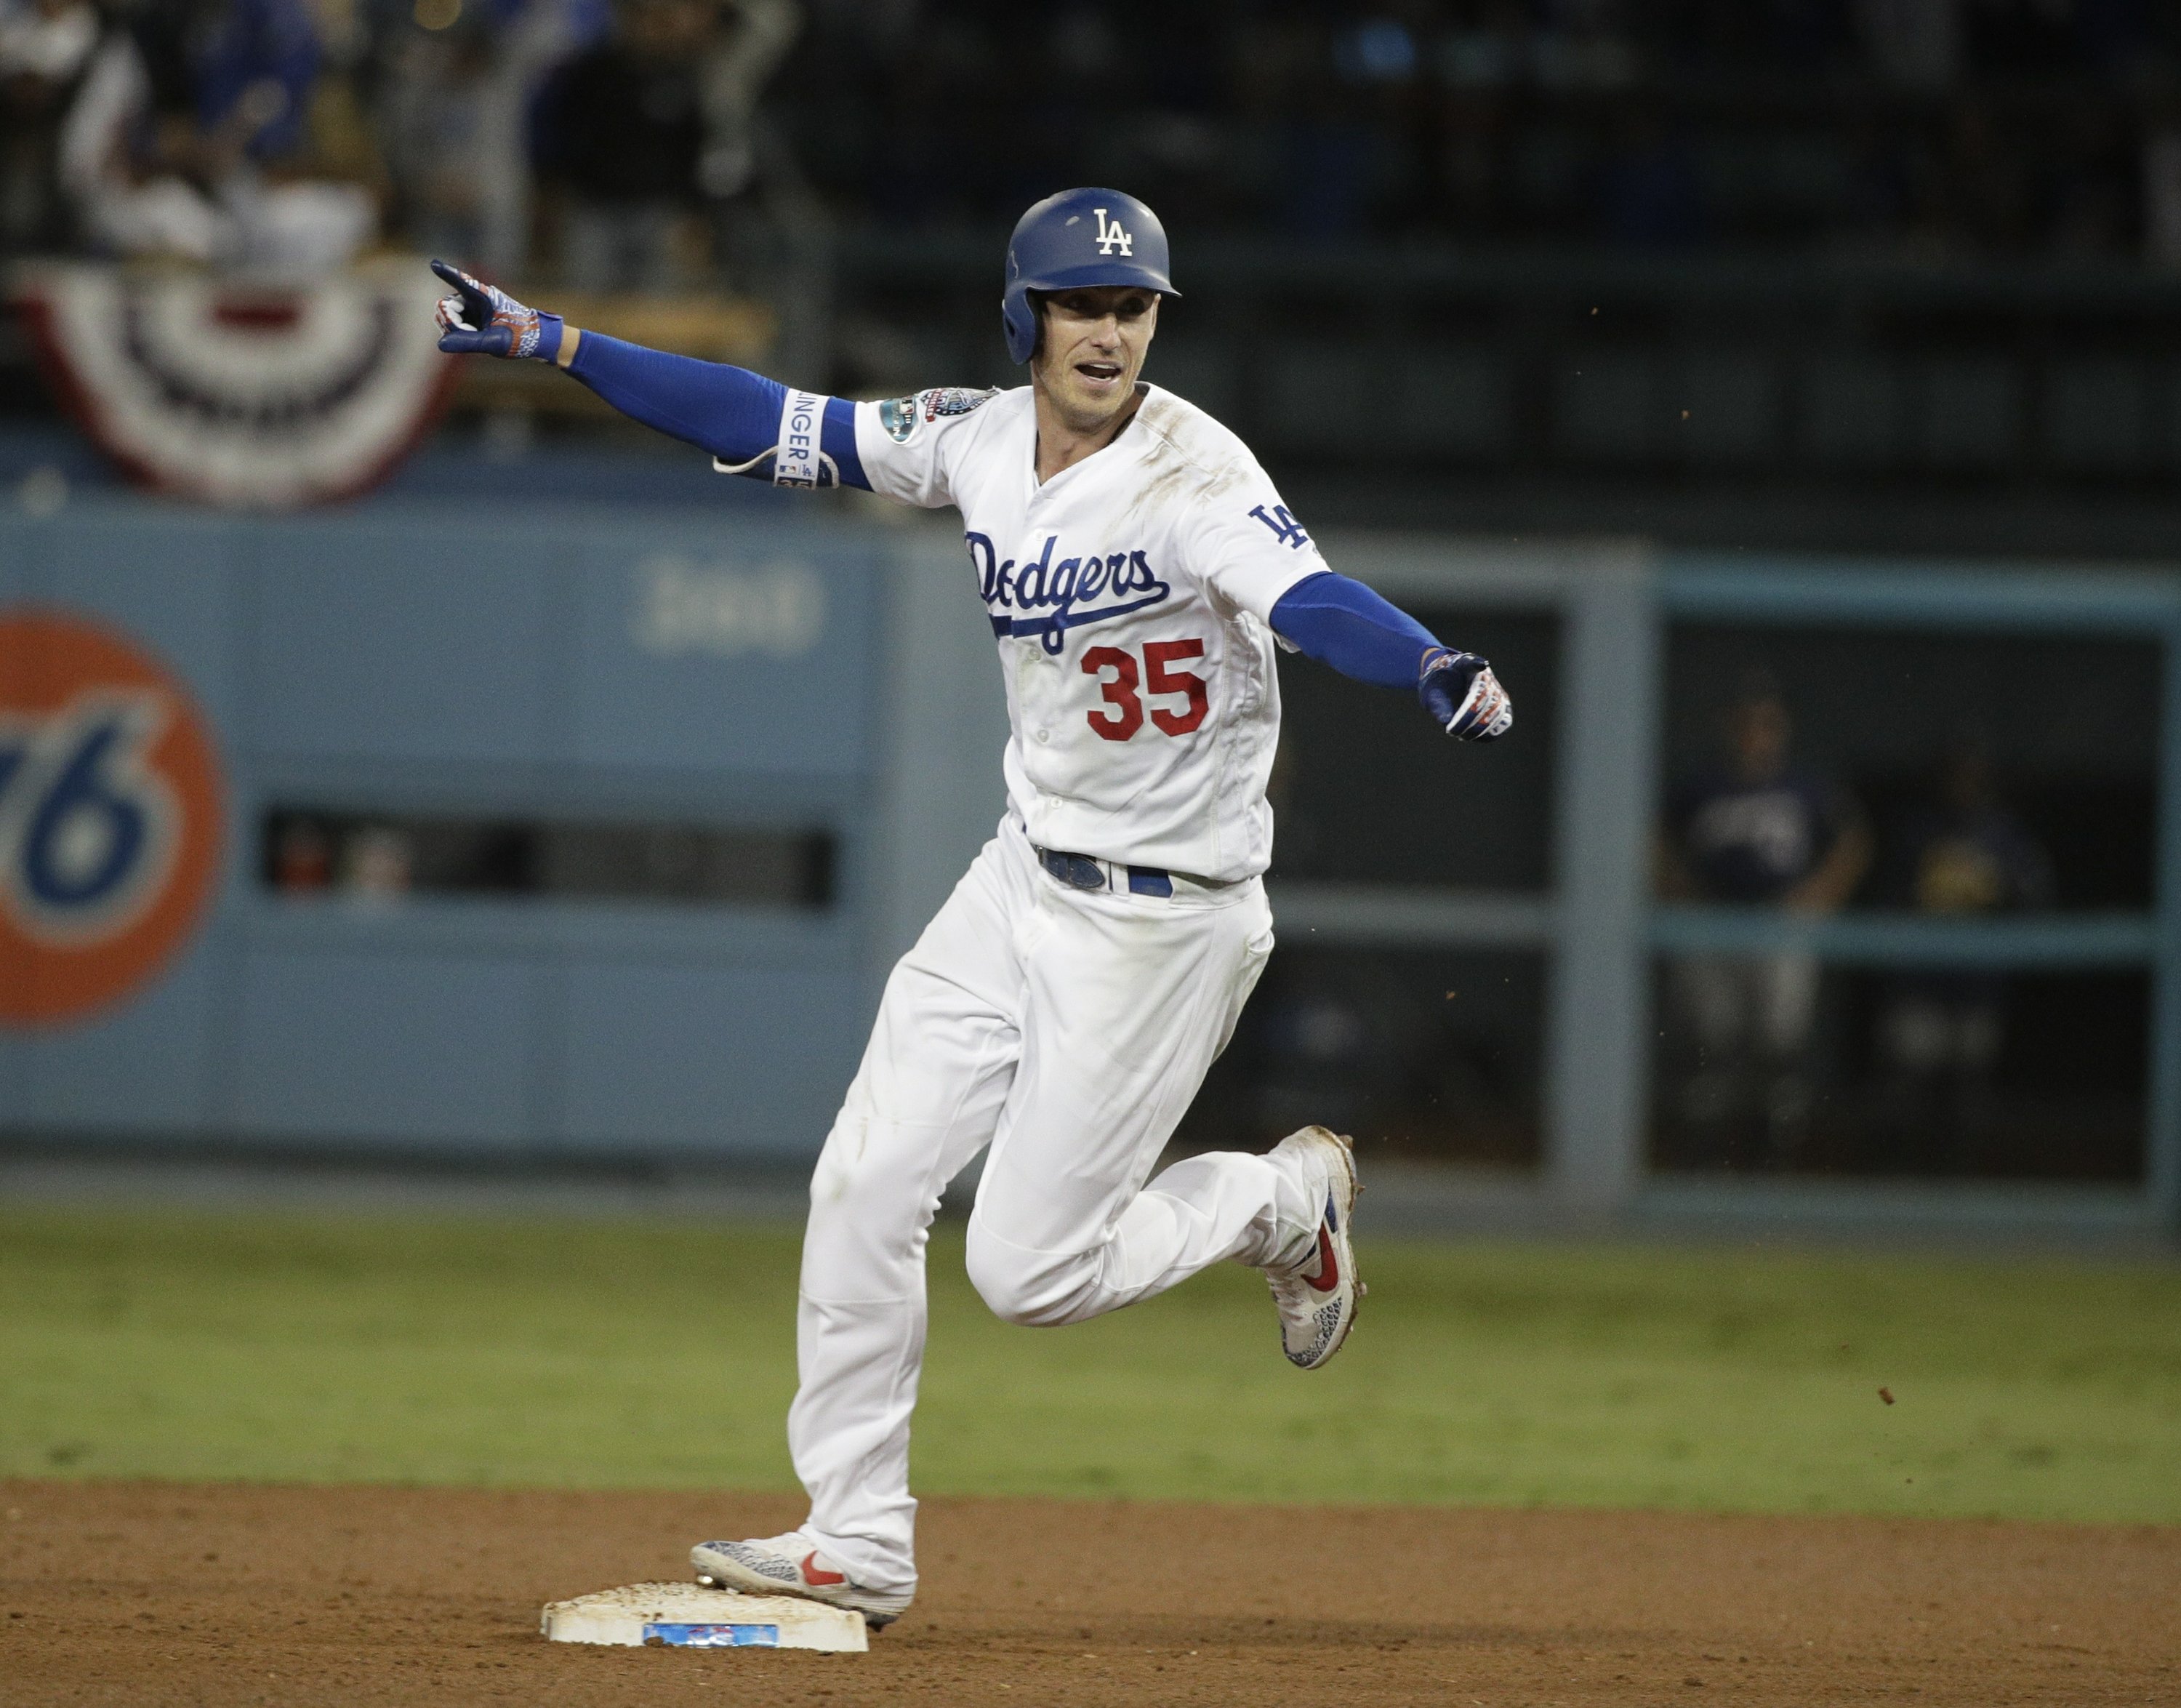 NLCS tied: Bellinger lifts Dodgers over Brewers 2-1 in 13